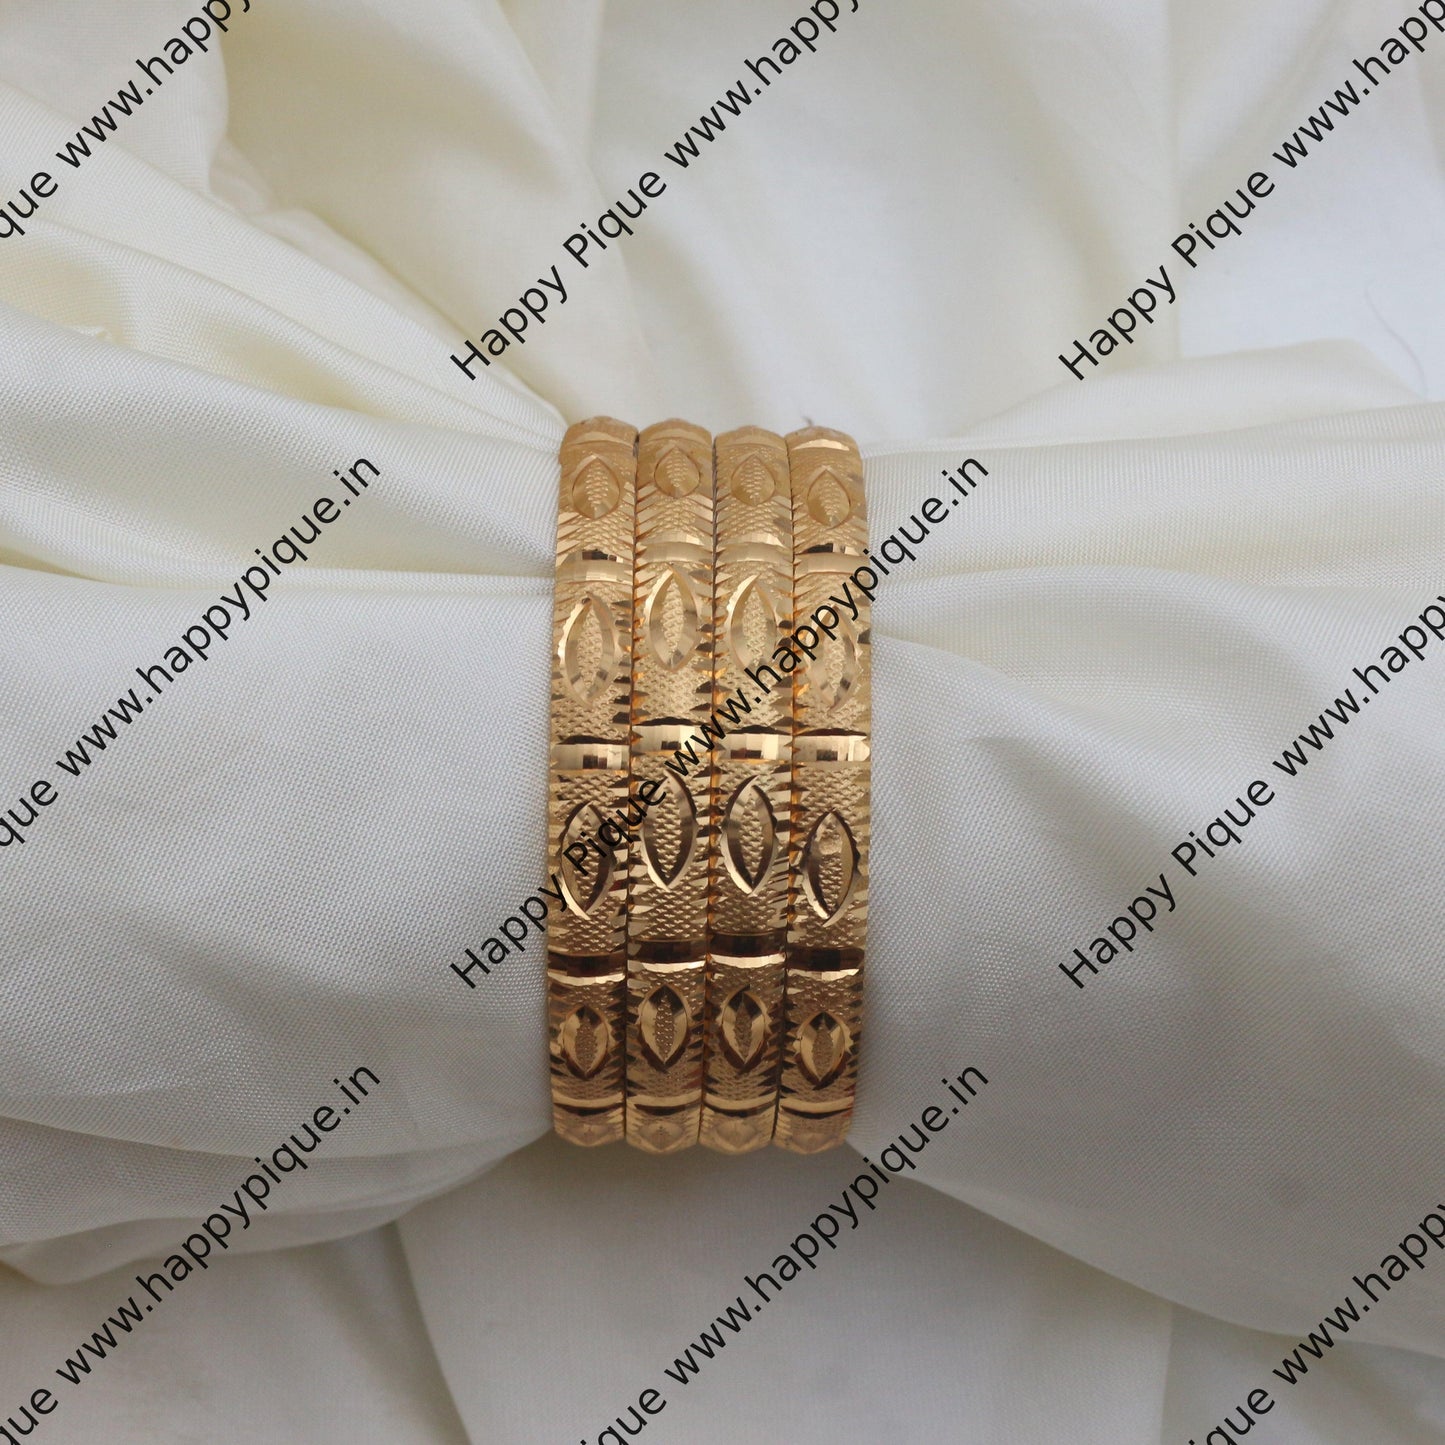 Real Gold Tone Set of 4 Bangles - SS033 - Daily Wear/Office Wear/Function Wear Bangles